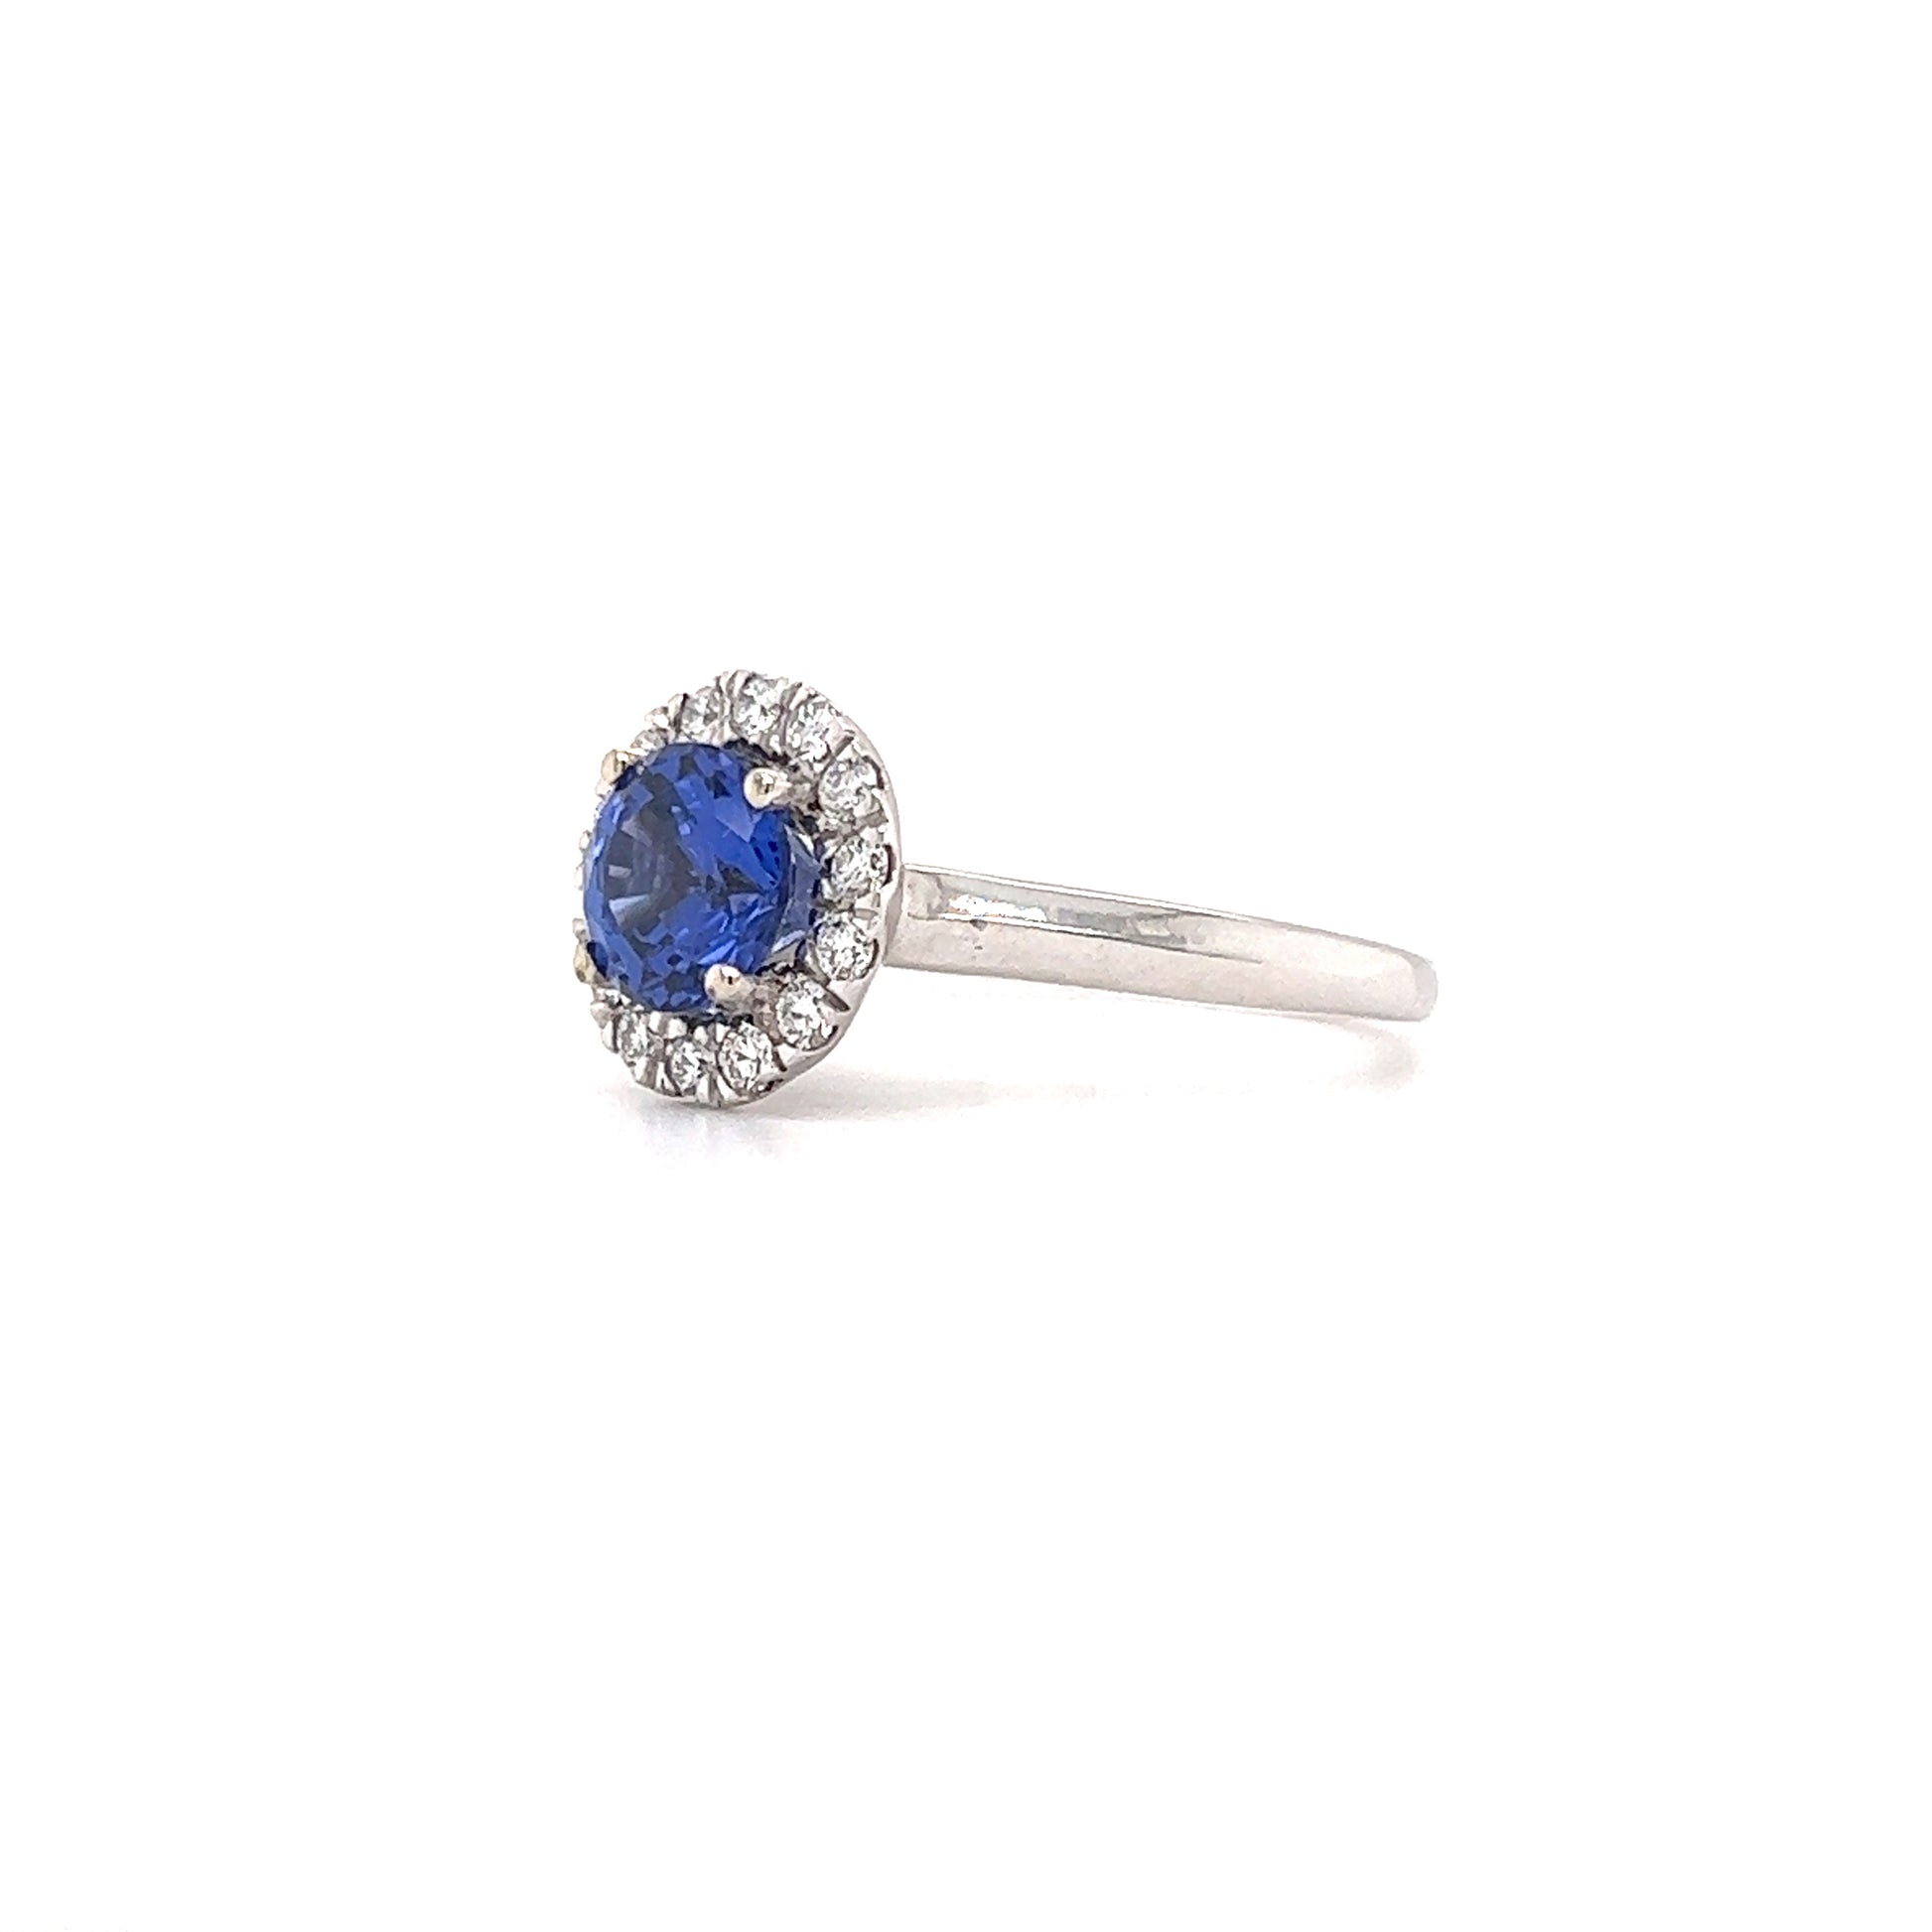 Round Sapphire Ring with Diamond Halo in 14K White Gold Right Side View